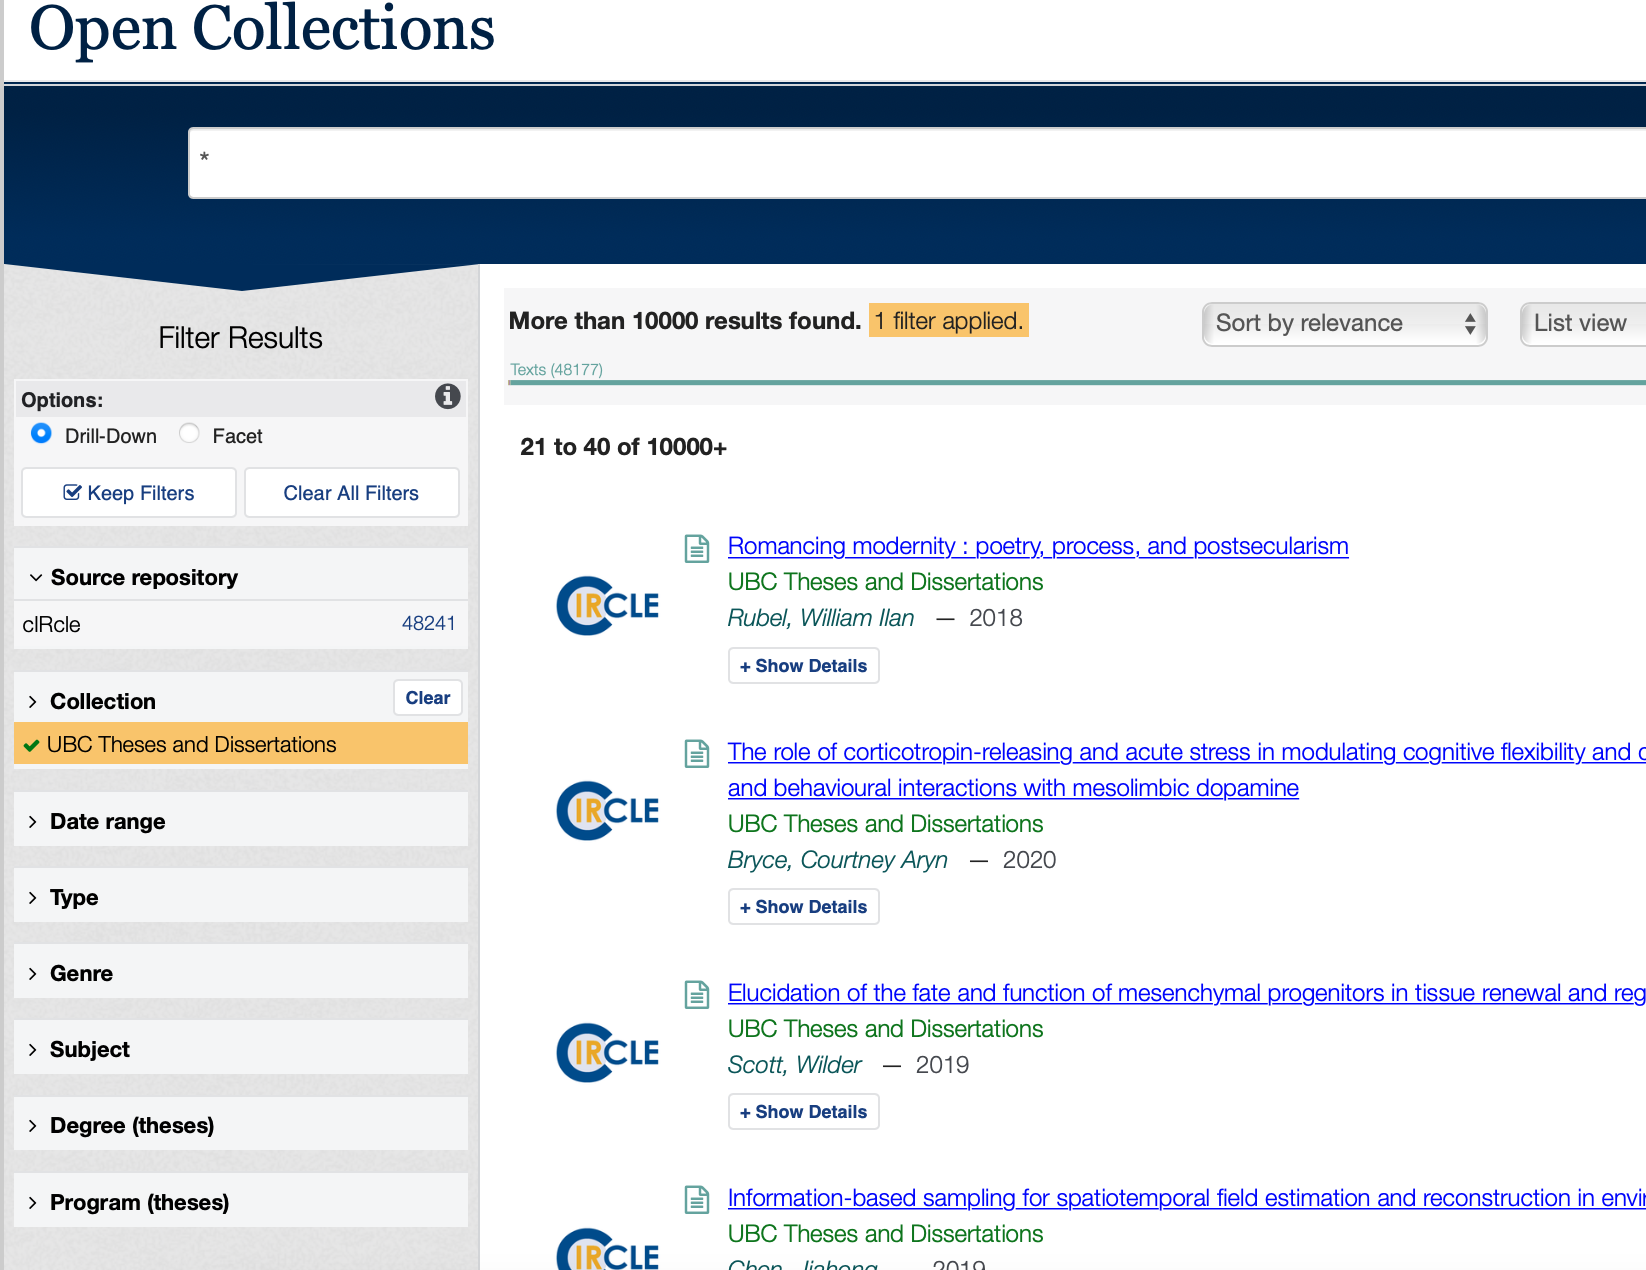 Open Collections example